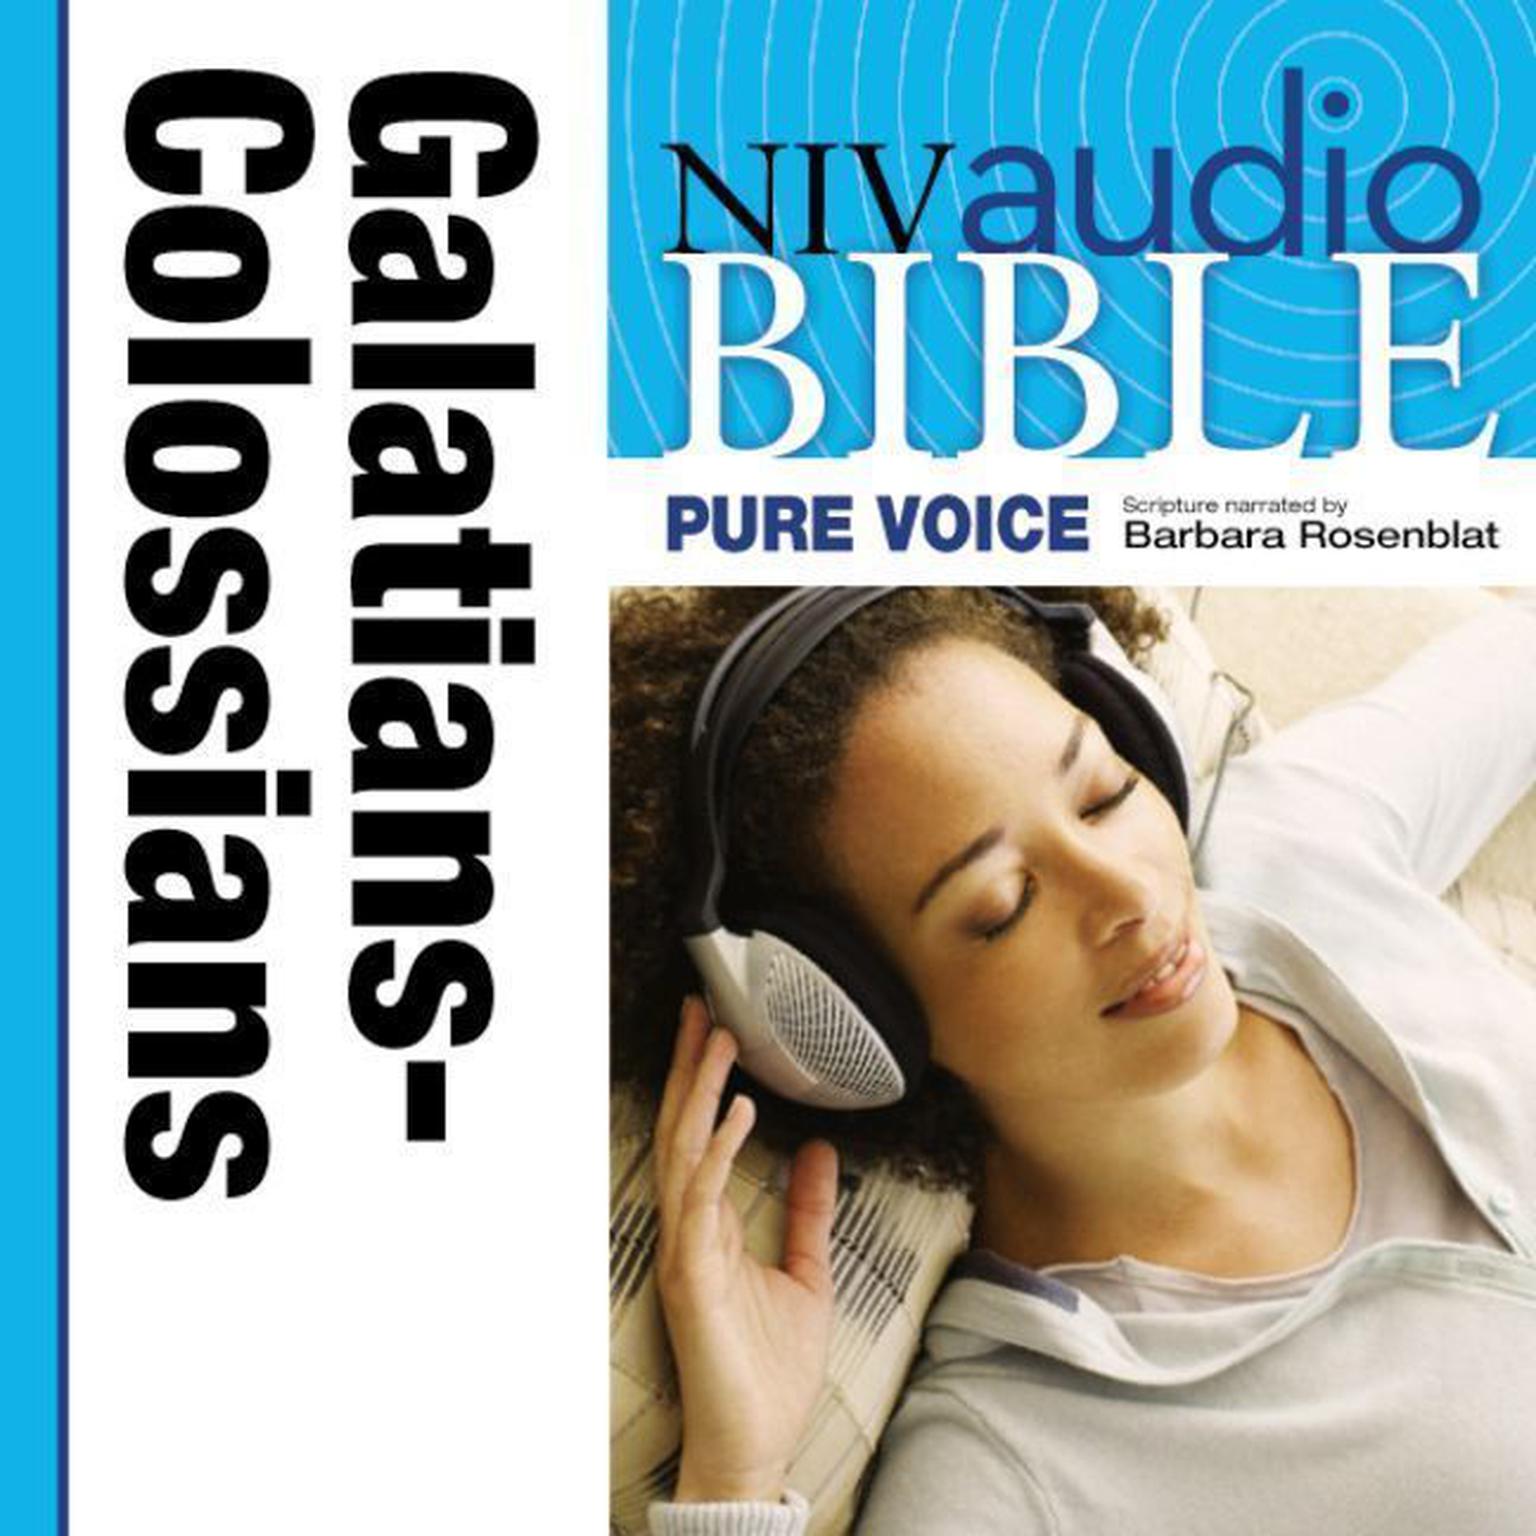 Pure Voice Audio Bible - New International Version, NIV (Narrated by Barbara Rosenblat): (08) Galatians, Ephesians, Philippians, and Colossians Audiobook, by Zondervan